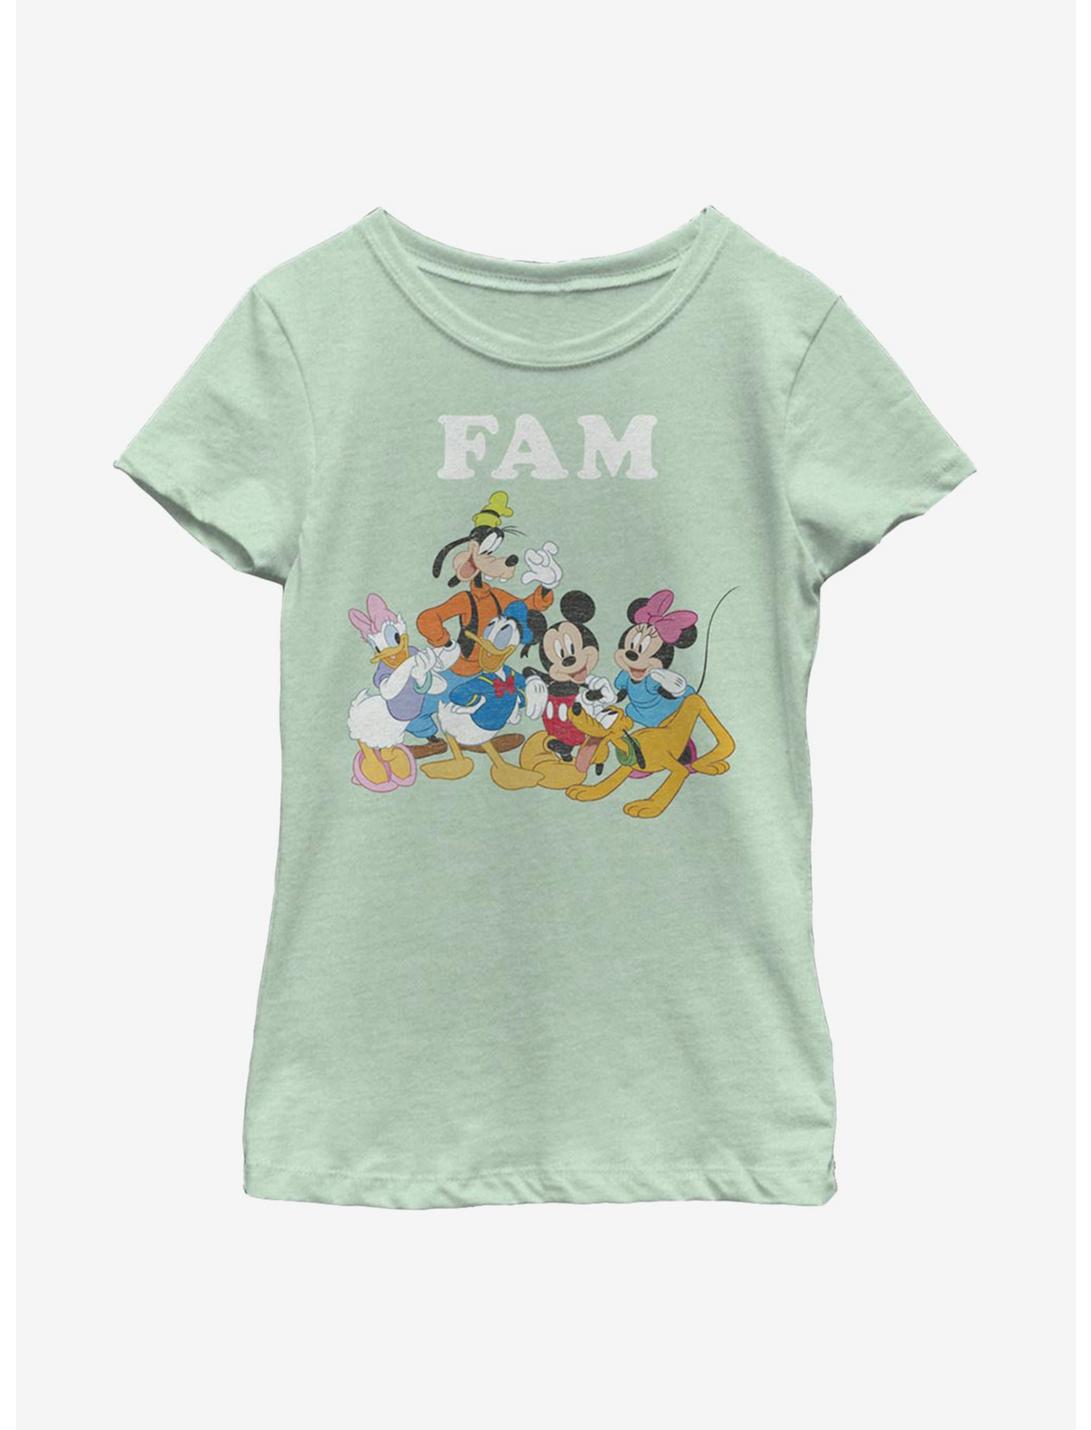 Disney Mickey Mouse Fam Youth Girls T-Shirt, MINT, hi-res